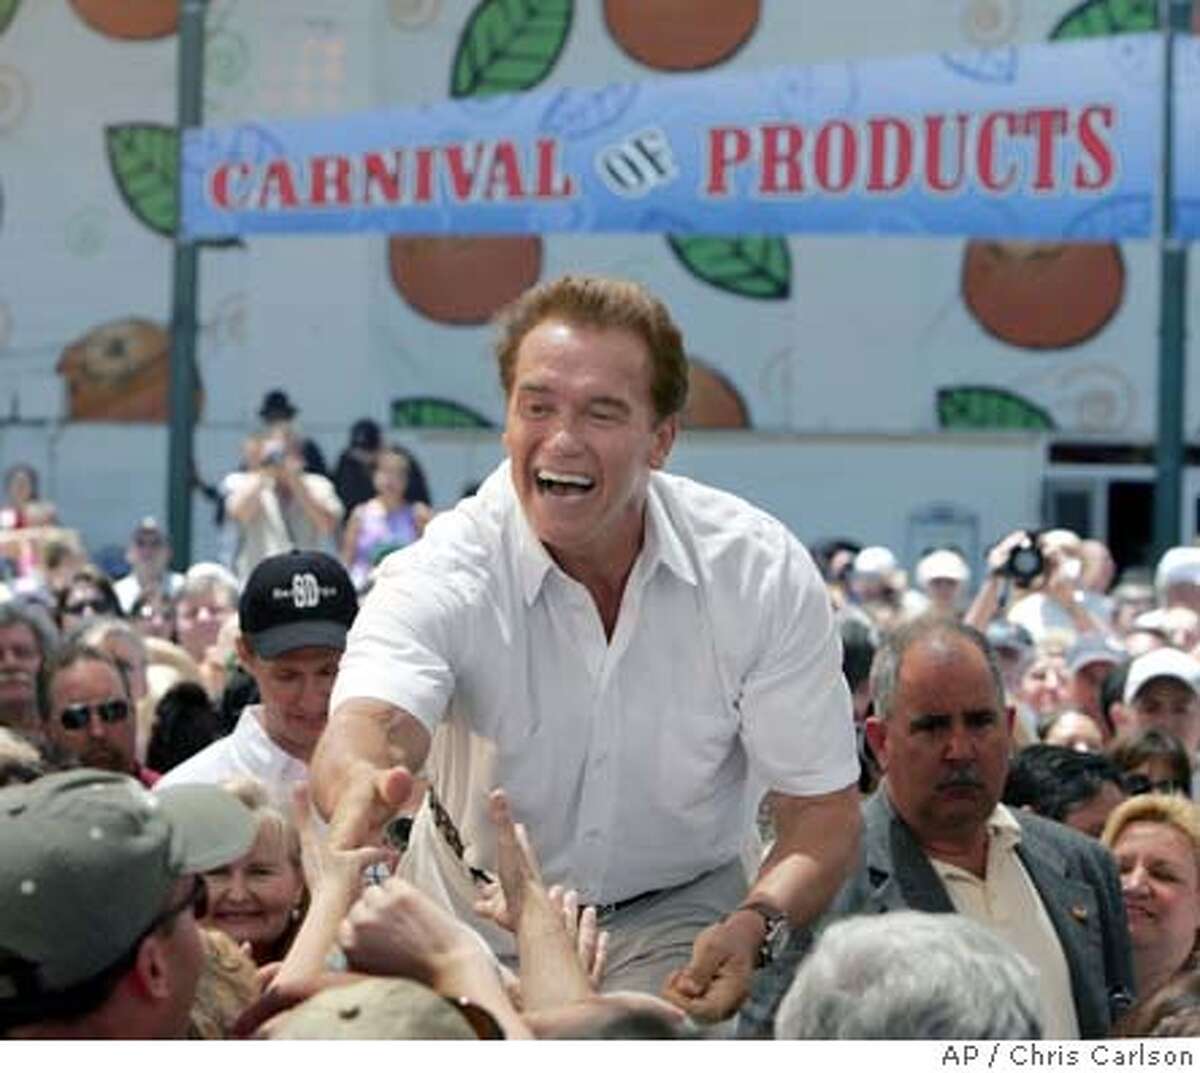 California Gov. Arnold Schwarzenegger thanks supporters for pressing legislators to pass the state budget Friday, July 30, 2004, during a visit to the Orange County Fair in Costa Mesa, Calif. (AP Photo/Chris Carlson)